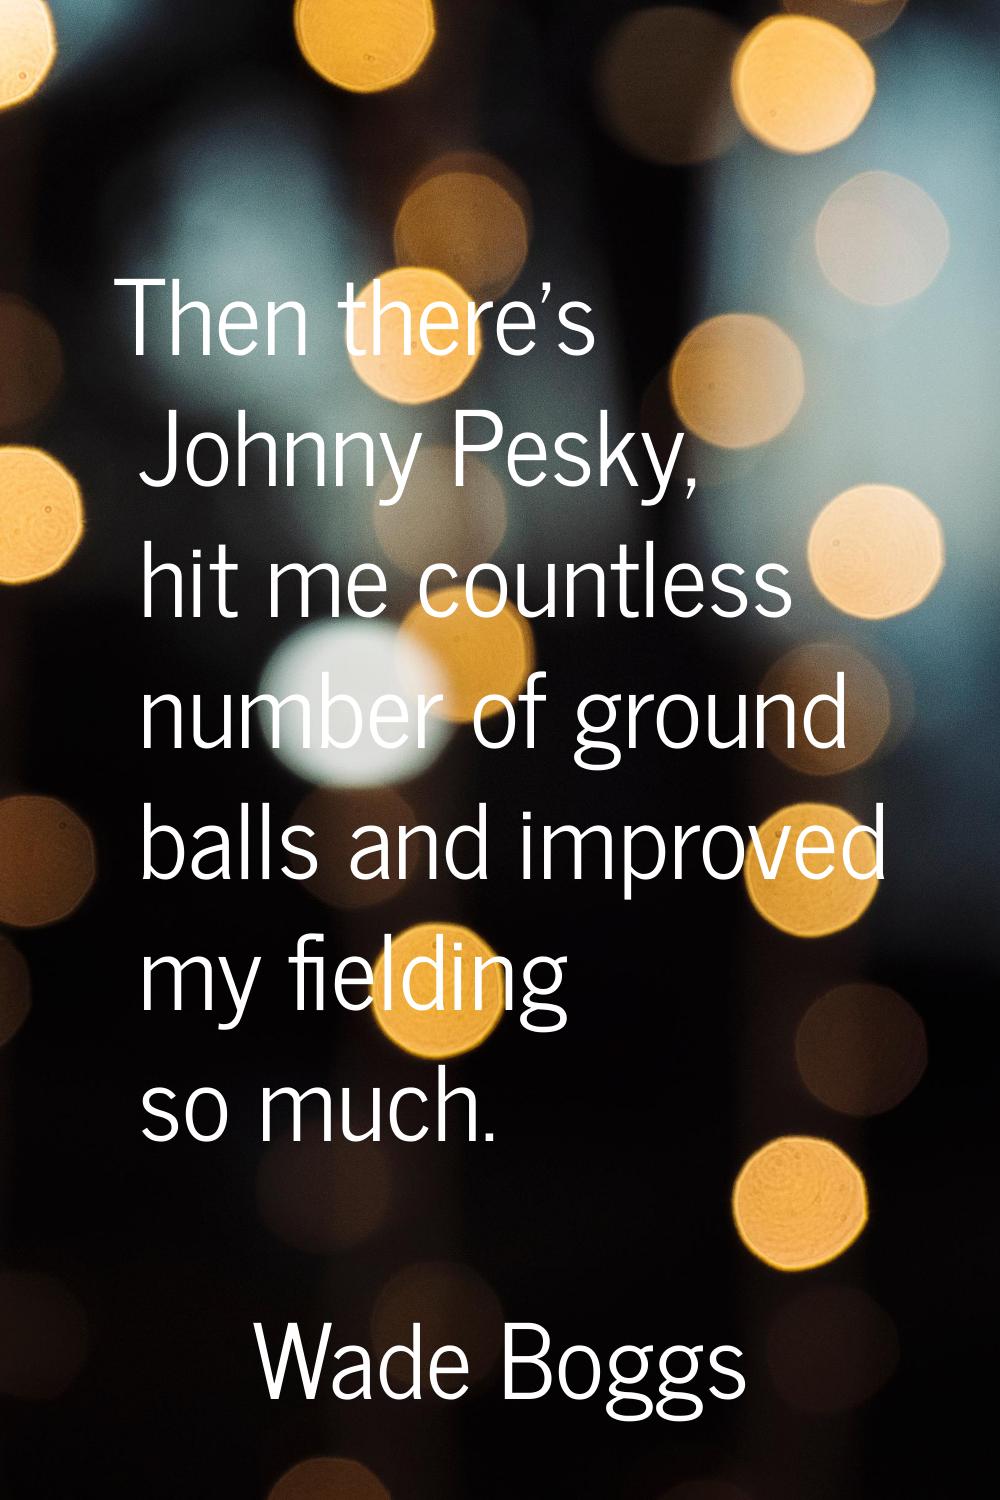 Then there's Johnny Pesky, hit me countless number of ground balls and improved my fielding so much